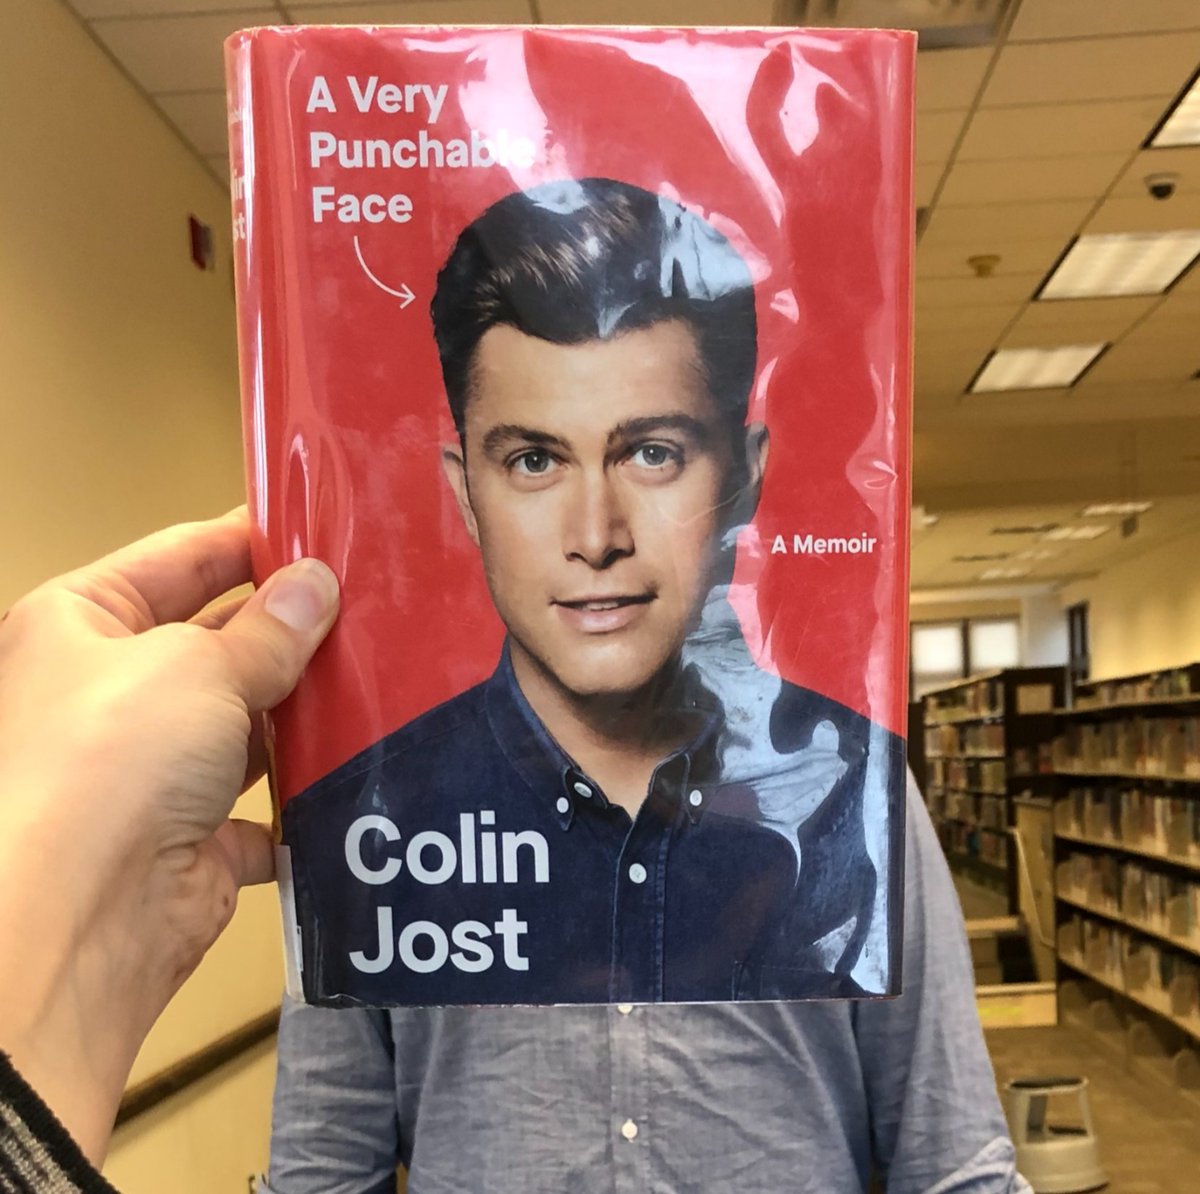 Happy #BookFaceFriday everyone!

Looking for a laugh? Try reading Colin Jost's hilarious memoir, 